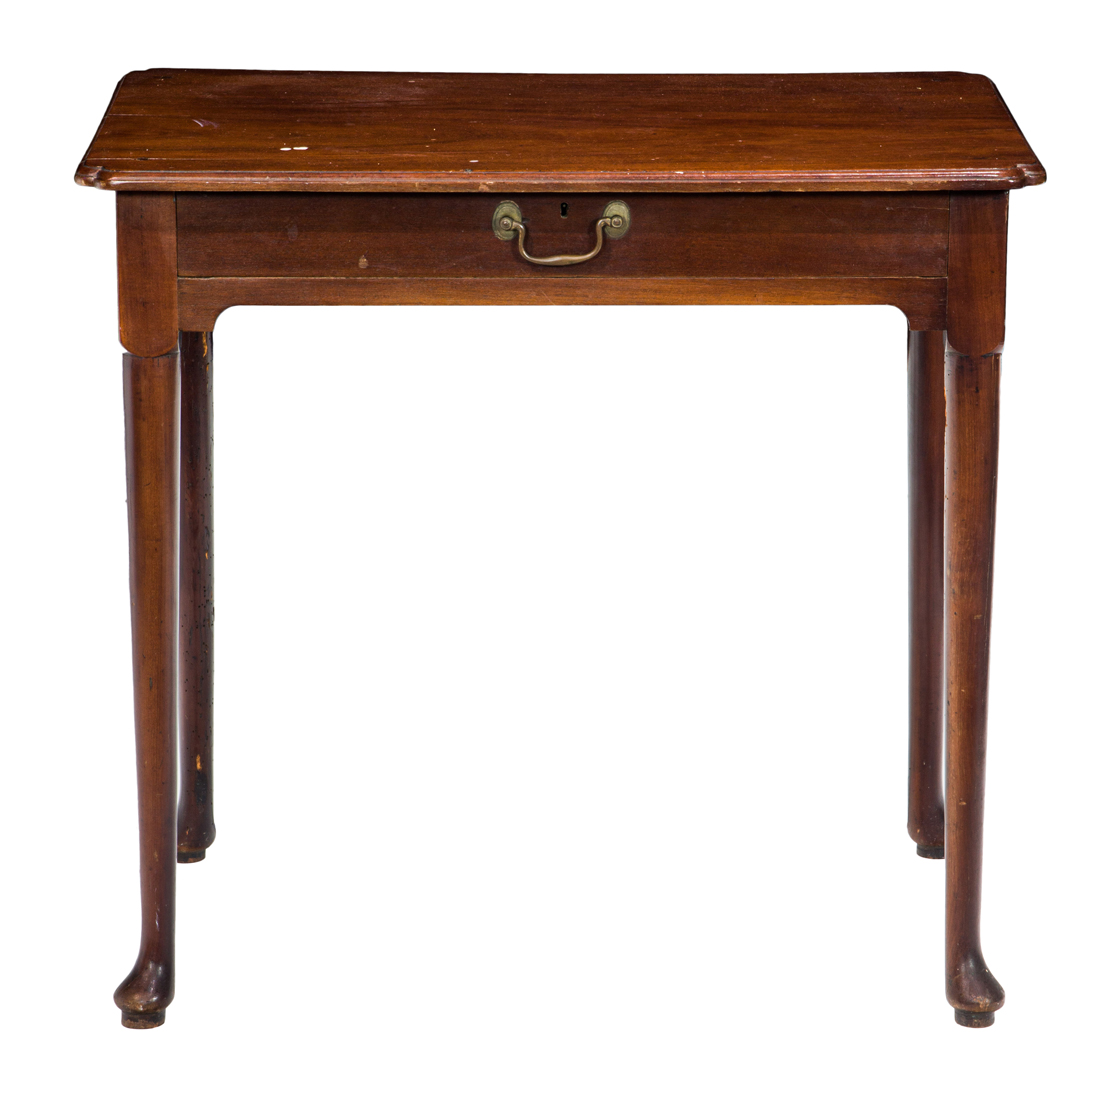 A QUEEN ANNE STYLE MAHOGANY SIDE 3a14d1